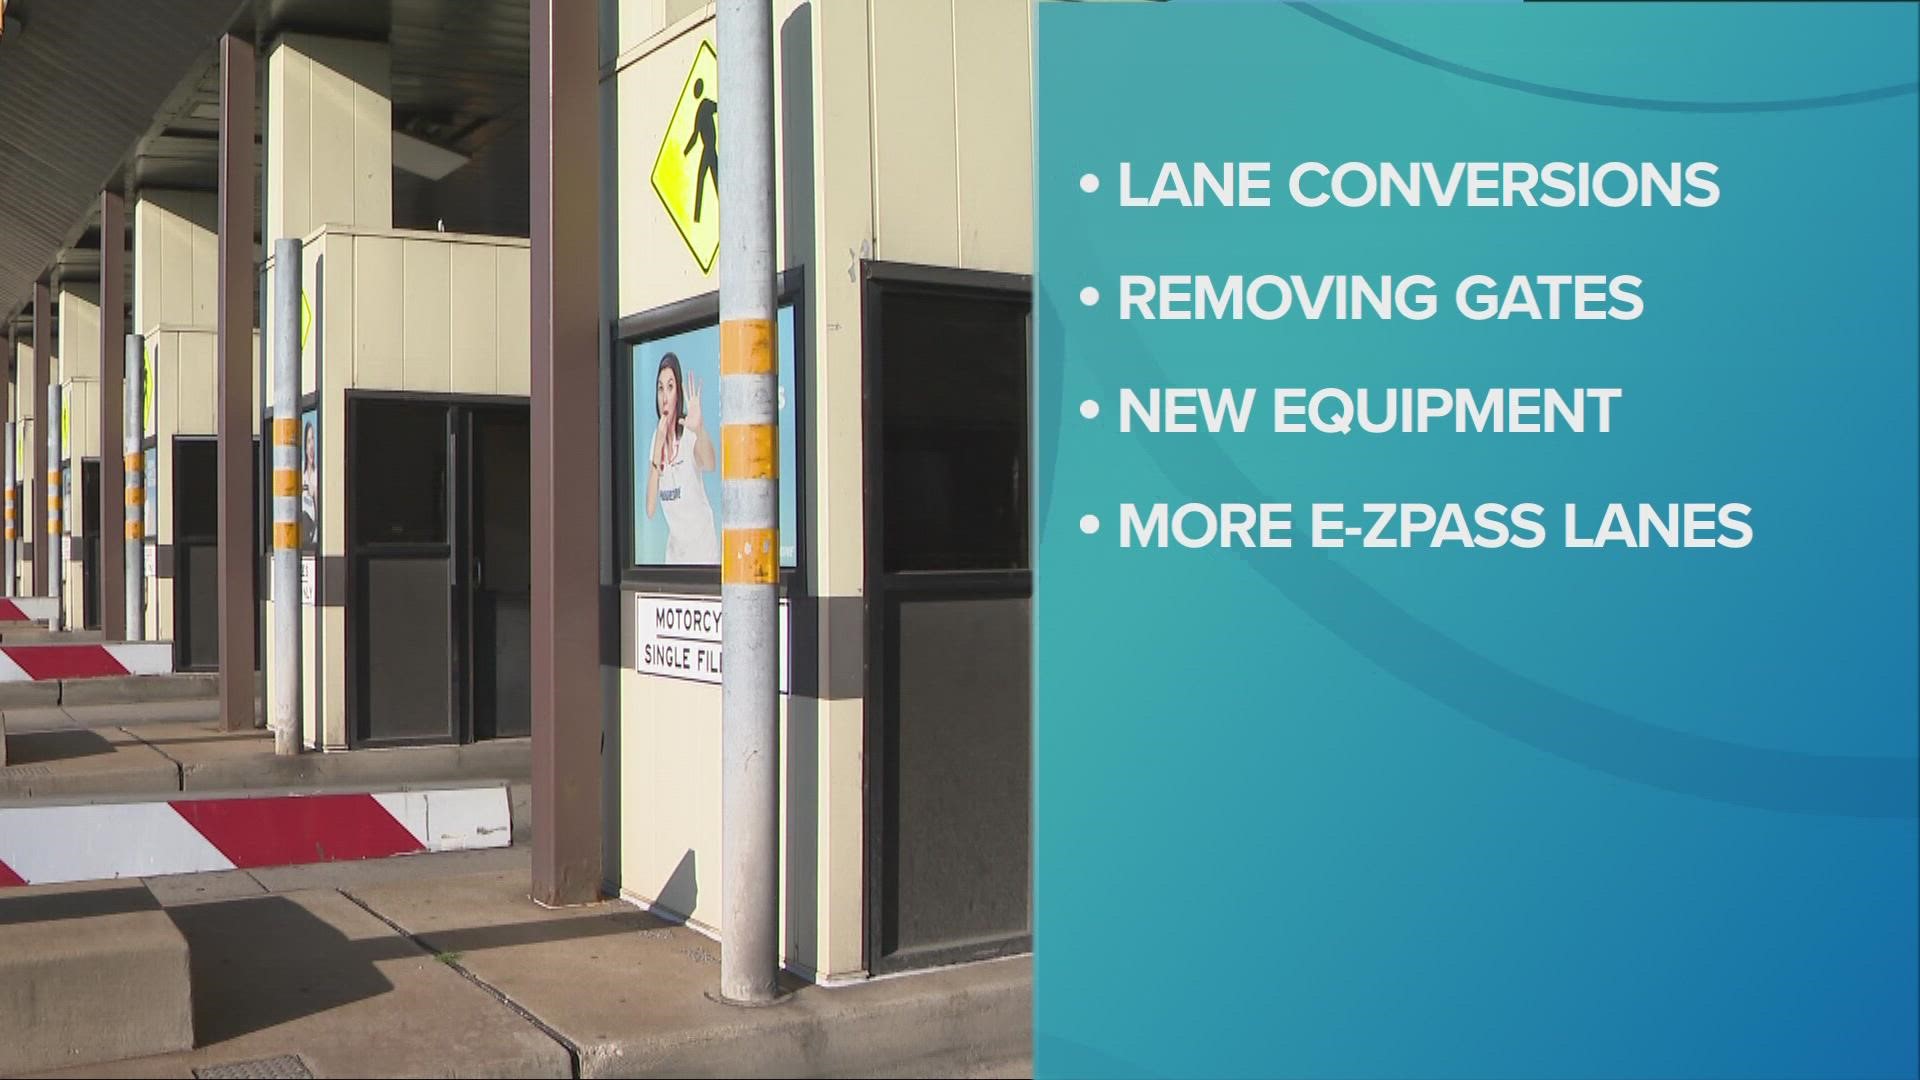 What you can expect amid removal of gates at toll plazas and lane conversions.